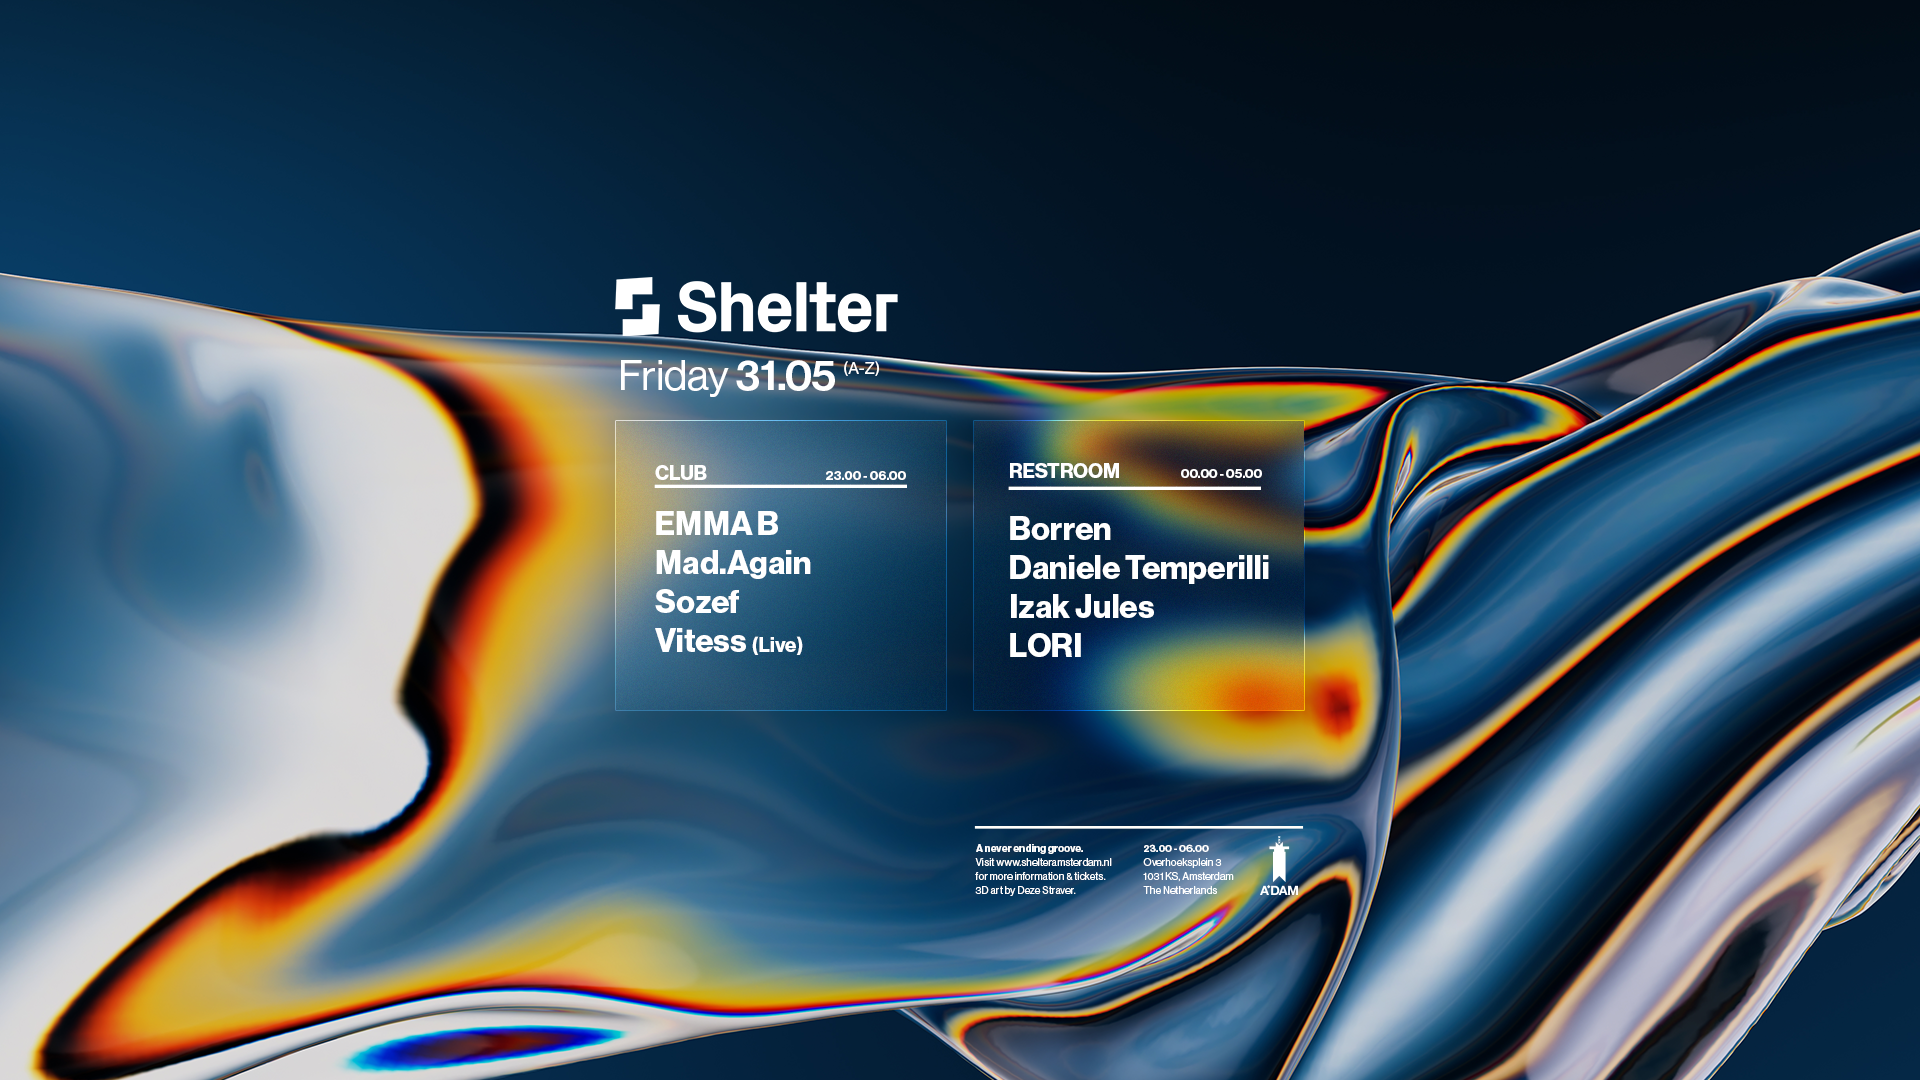 Shelter Club Night - with Mad Again, Vitess, Sozef - Página frontal